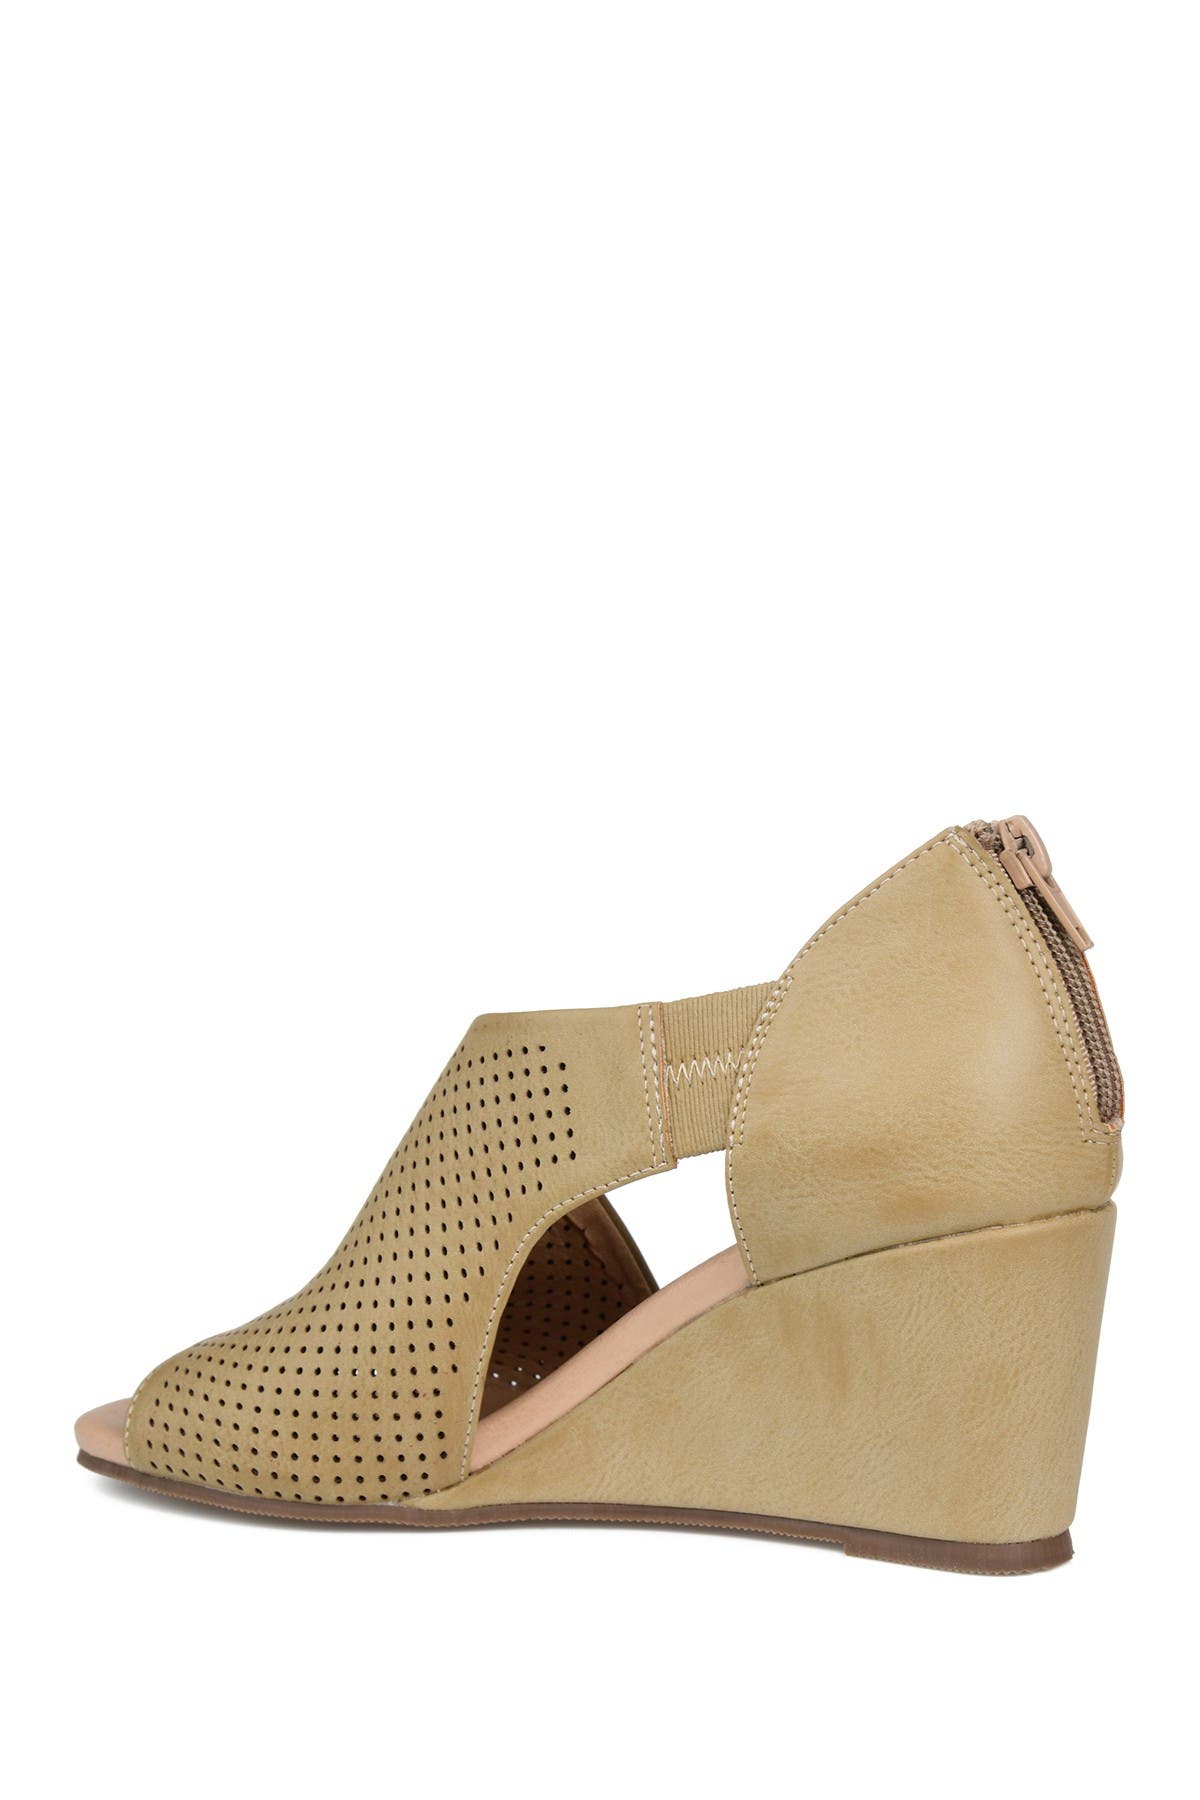 Journee Collection Aretha D'orsay Wedge Sandal In Medium Beige